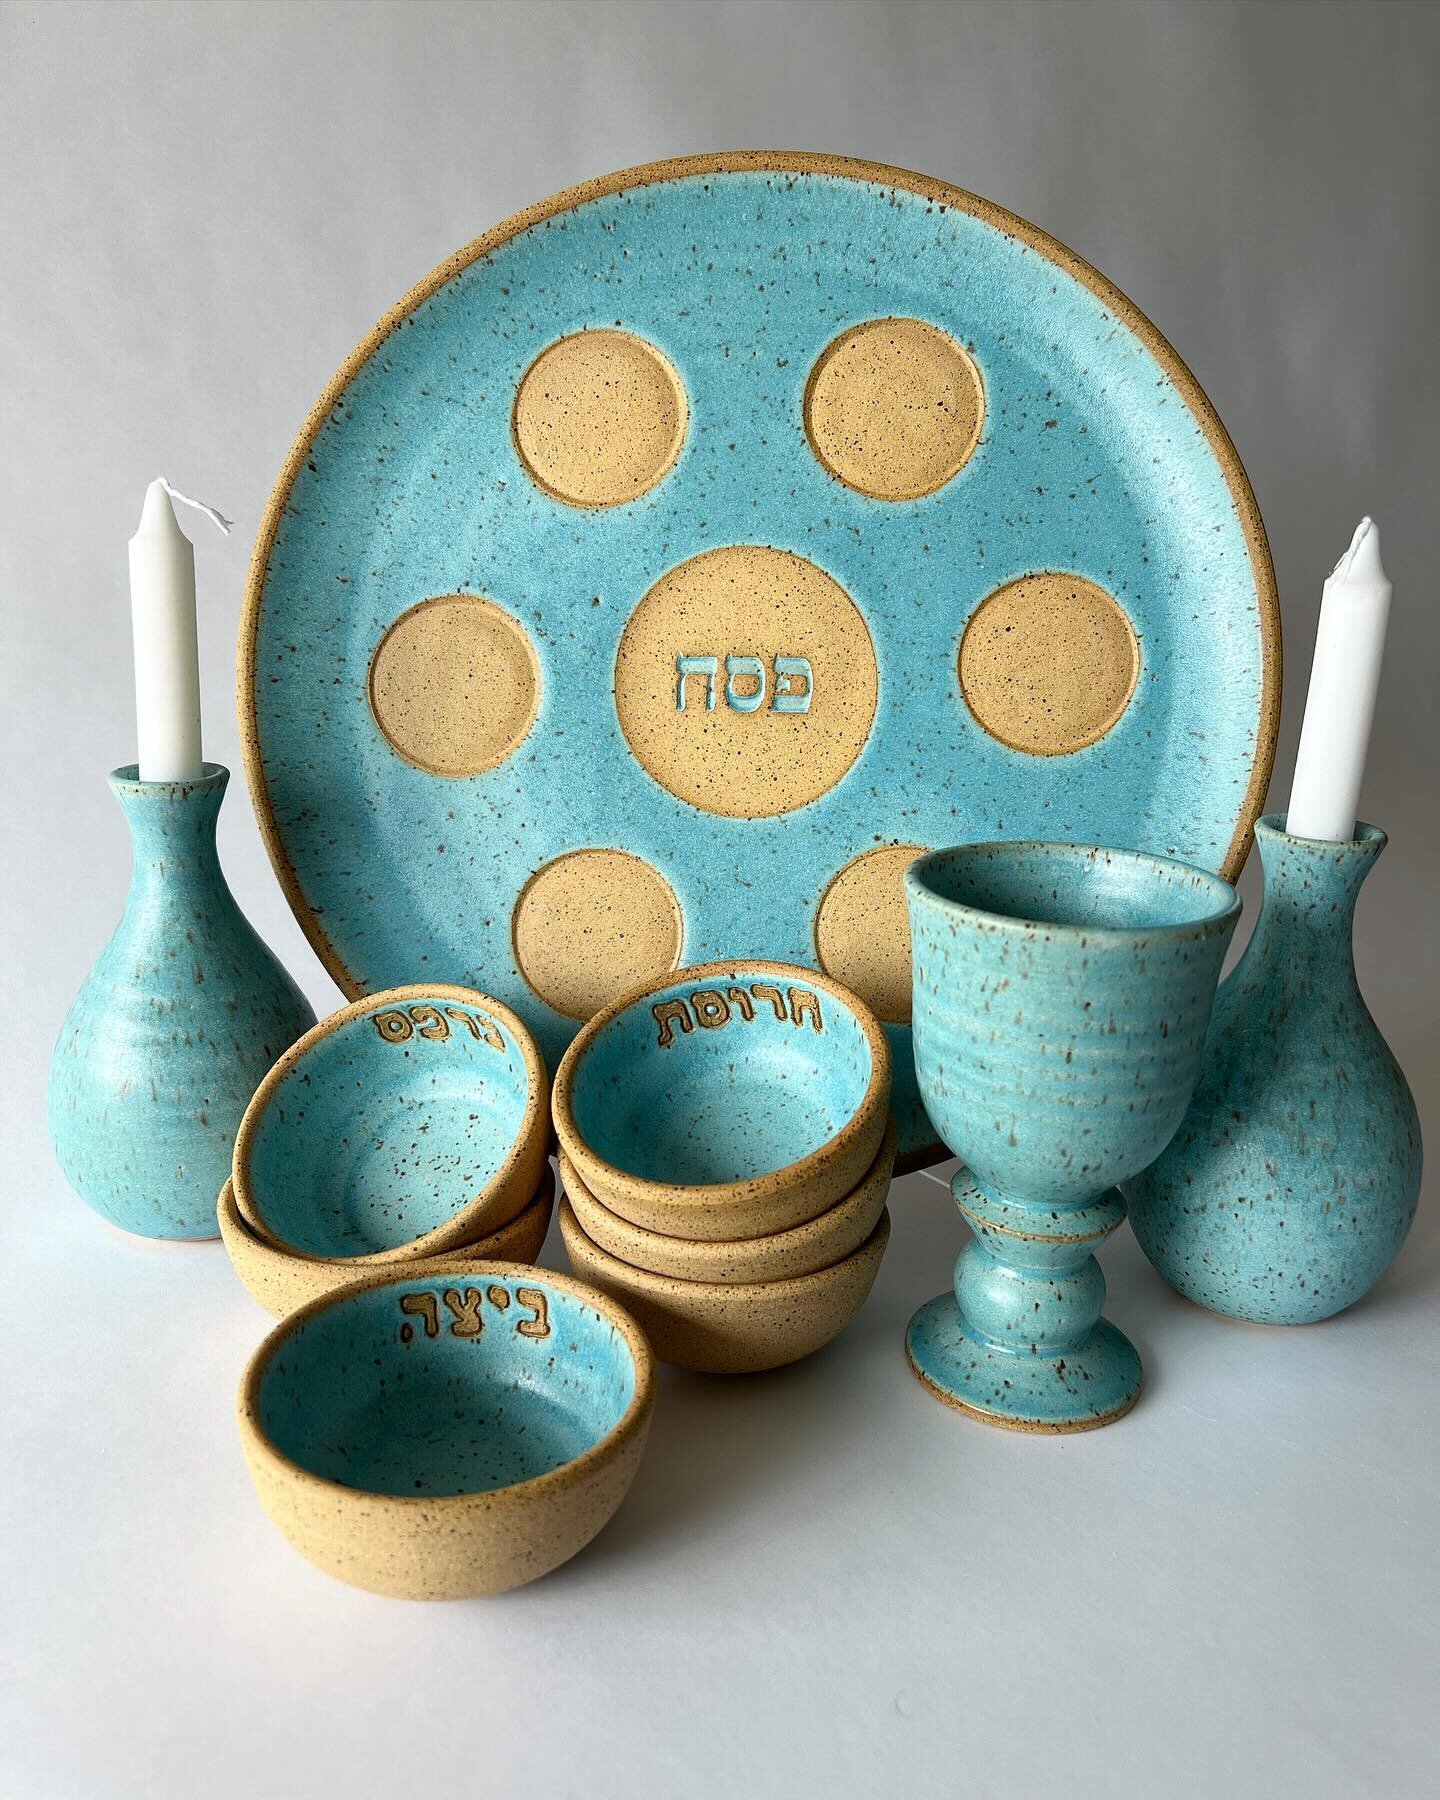 Our newest offering, the Seder Plate Set! Complete your Passover table with matching Seder Plate, Kiddush Cup and Shabbat Candlesticks! A modern heirloom to pass along your family&rsquo;s generations. All handmade in Brooklyn! 

#modernjudaica #judai